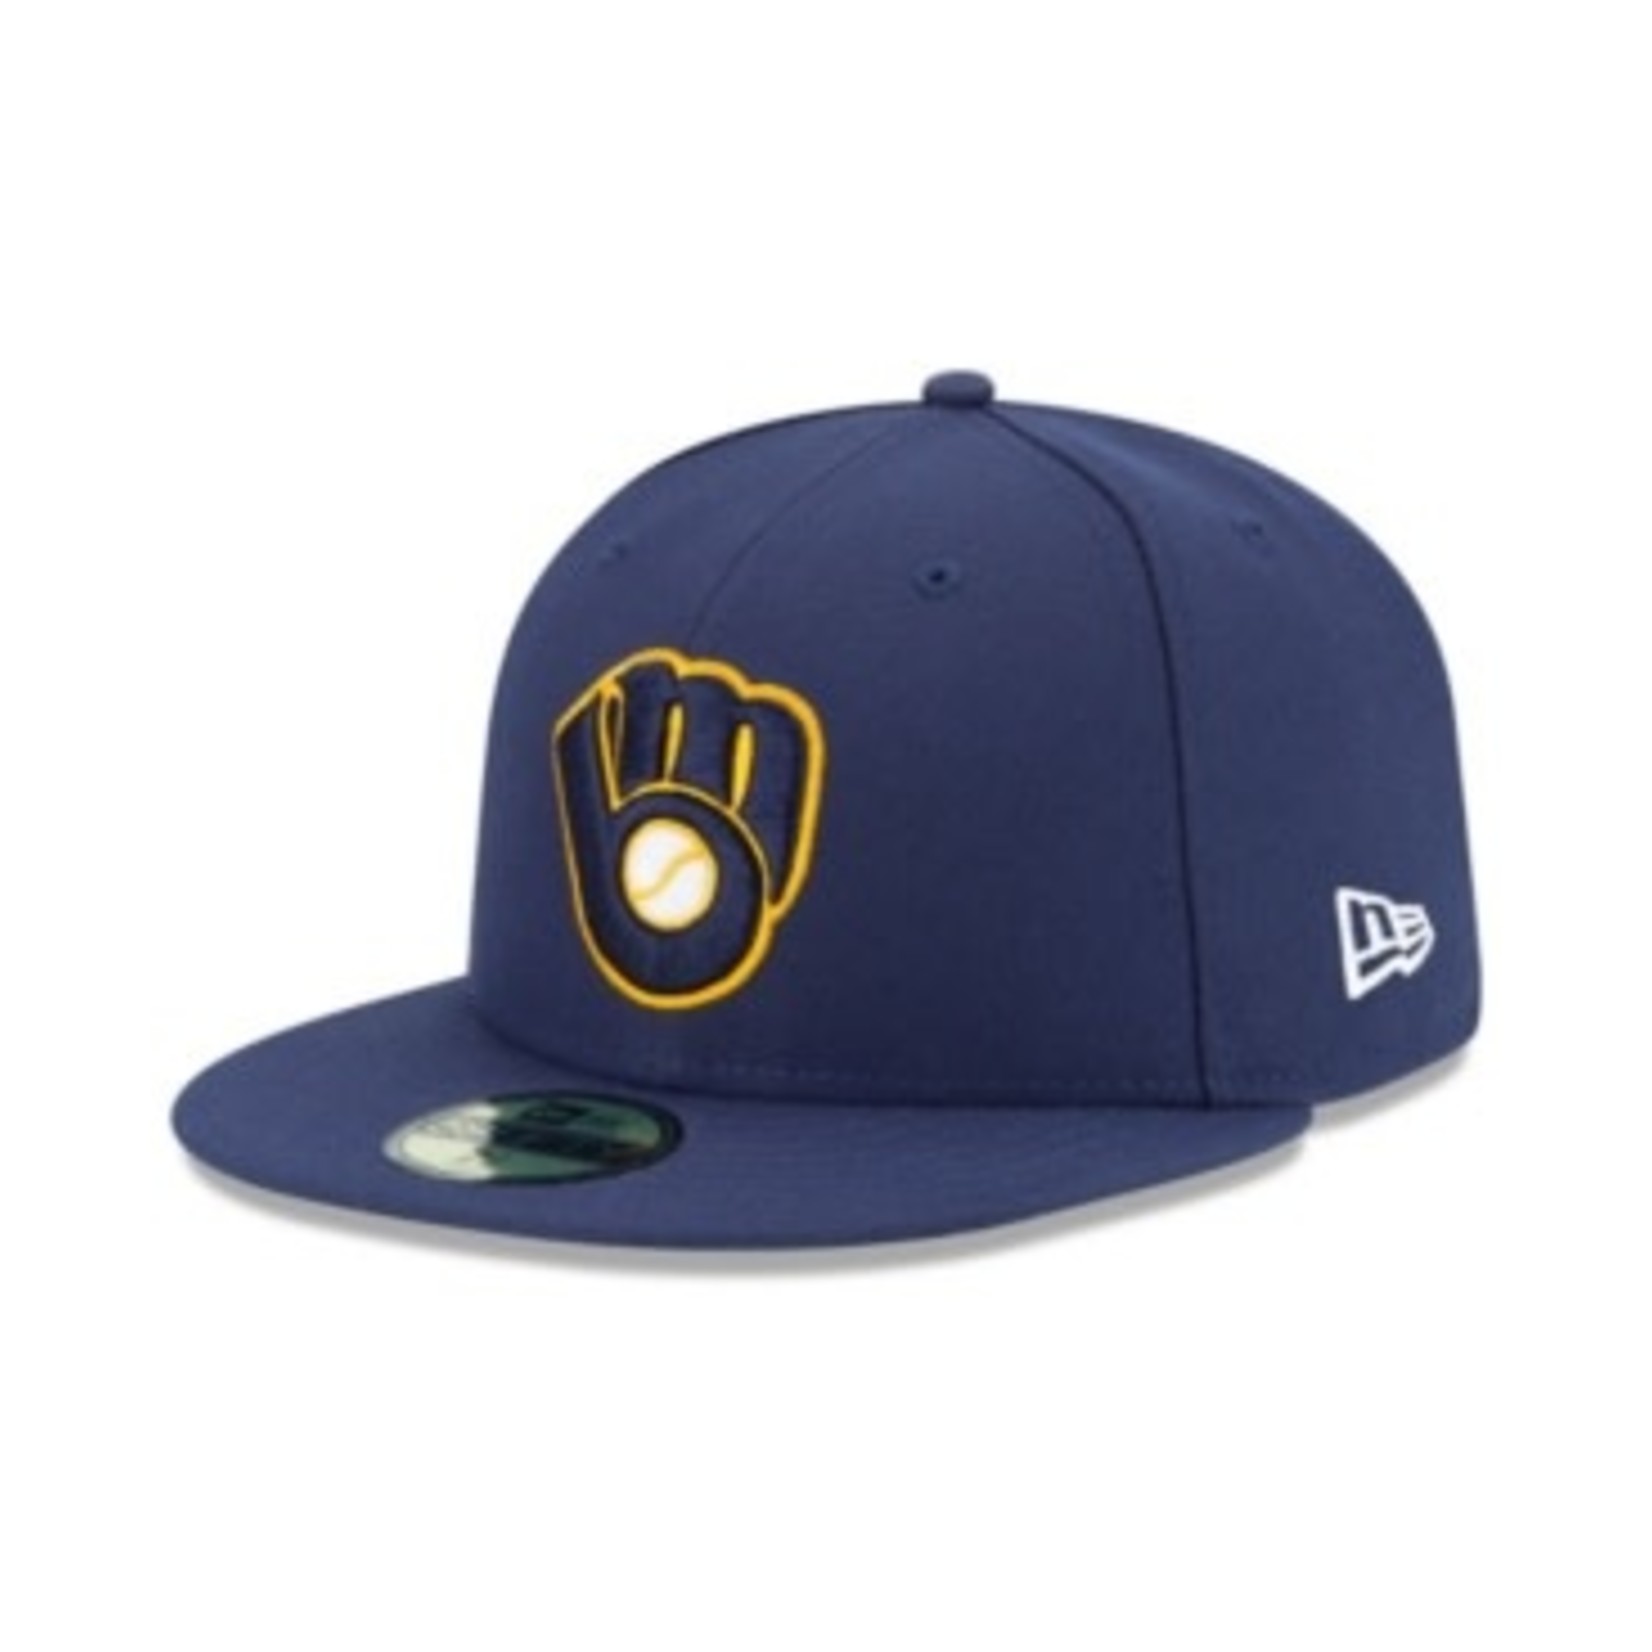 New Era Men's New Era Navy Milwaukee Brewers Alternate 2 Authentic on Field 59FIFTY Fitted Hat